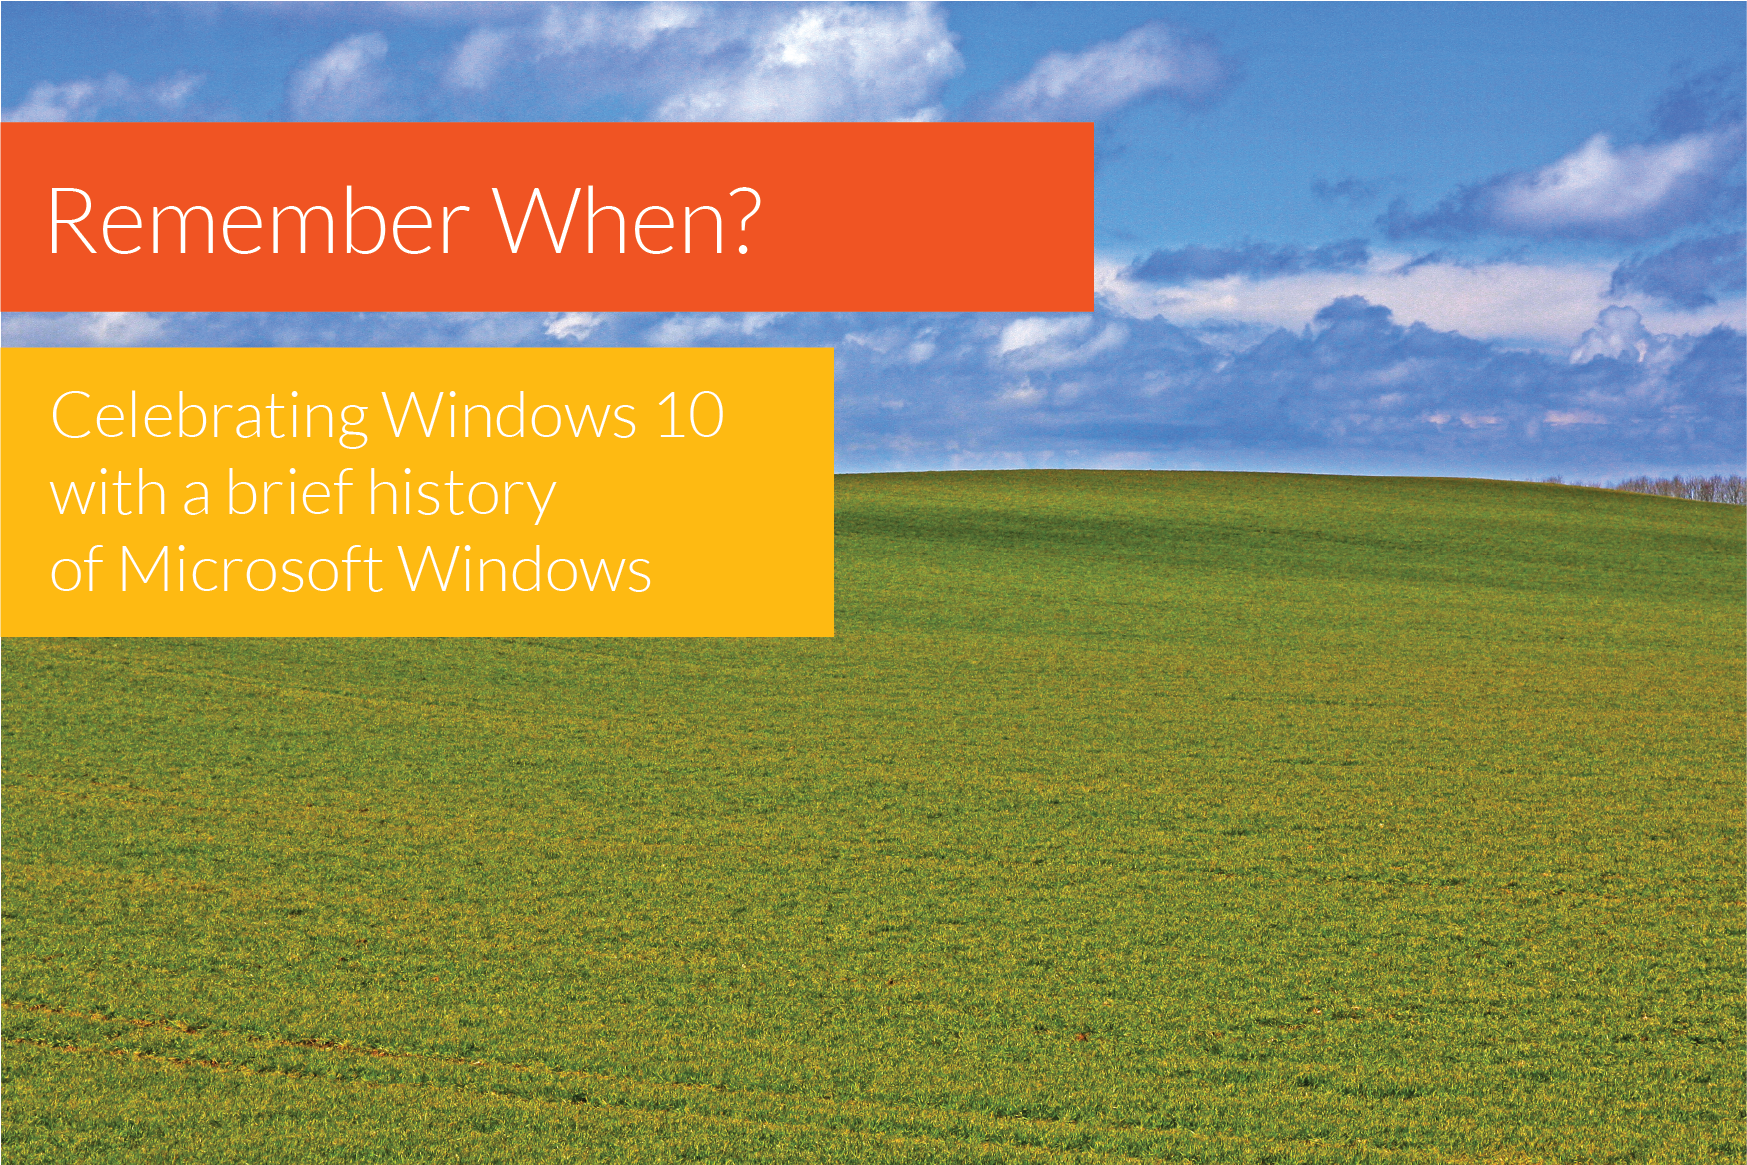 A brief history of Microsoft Windows through the ages